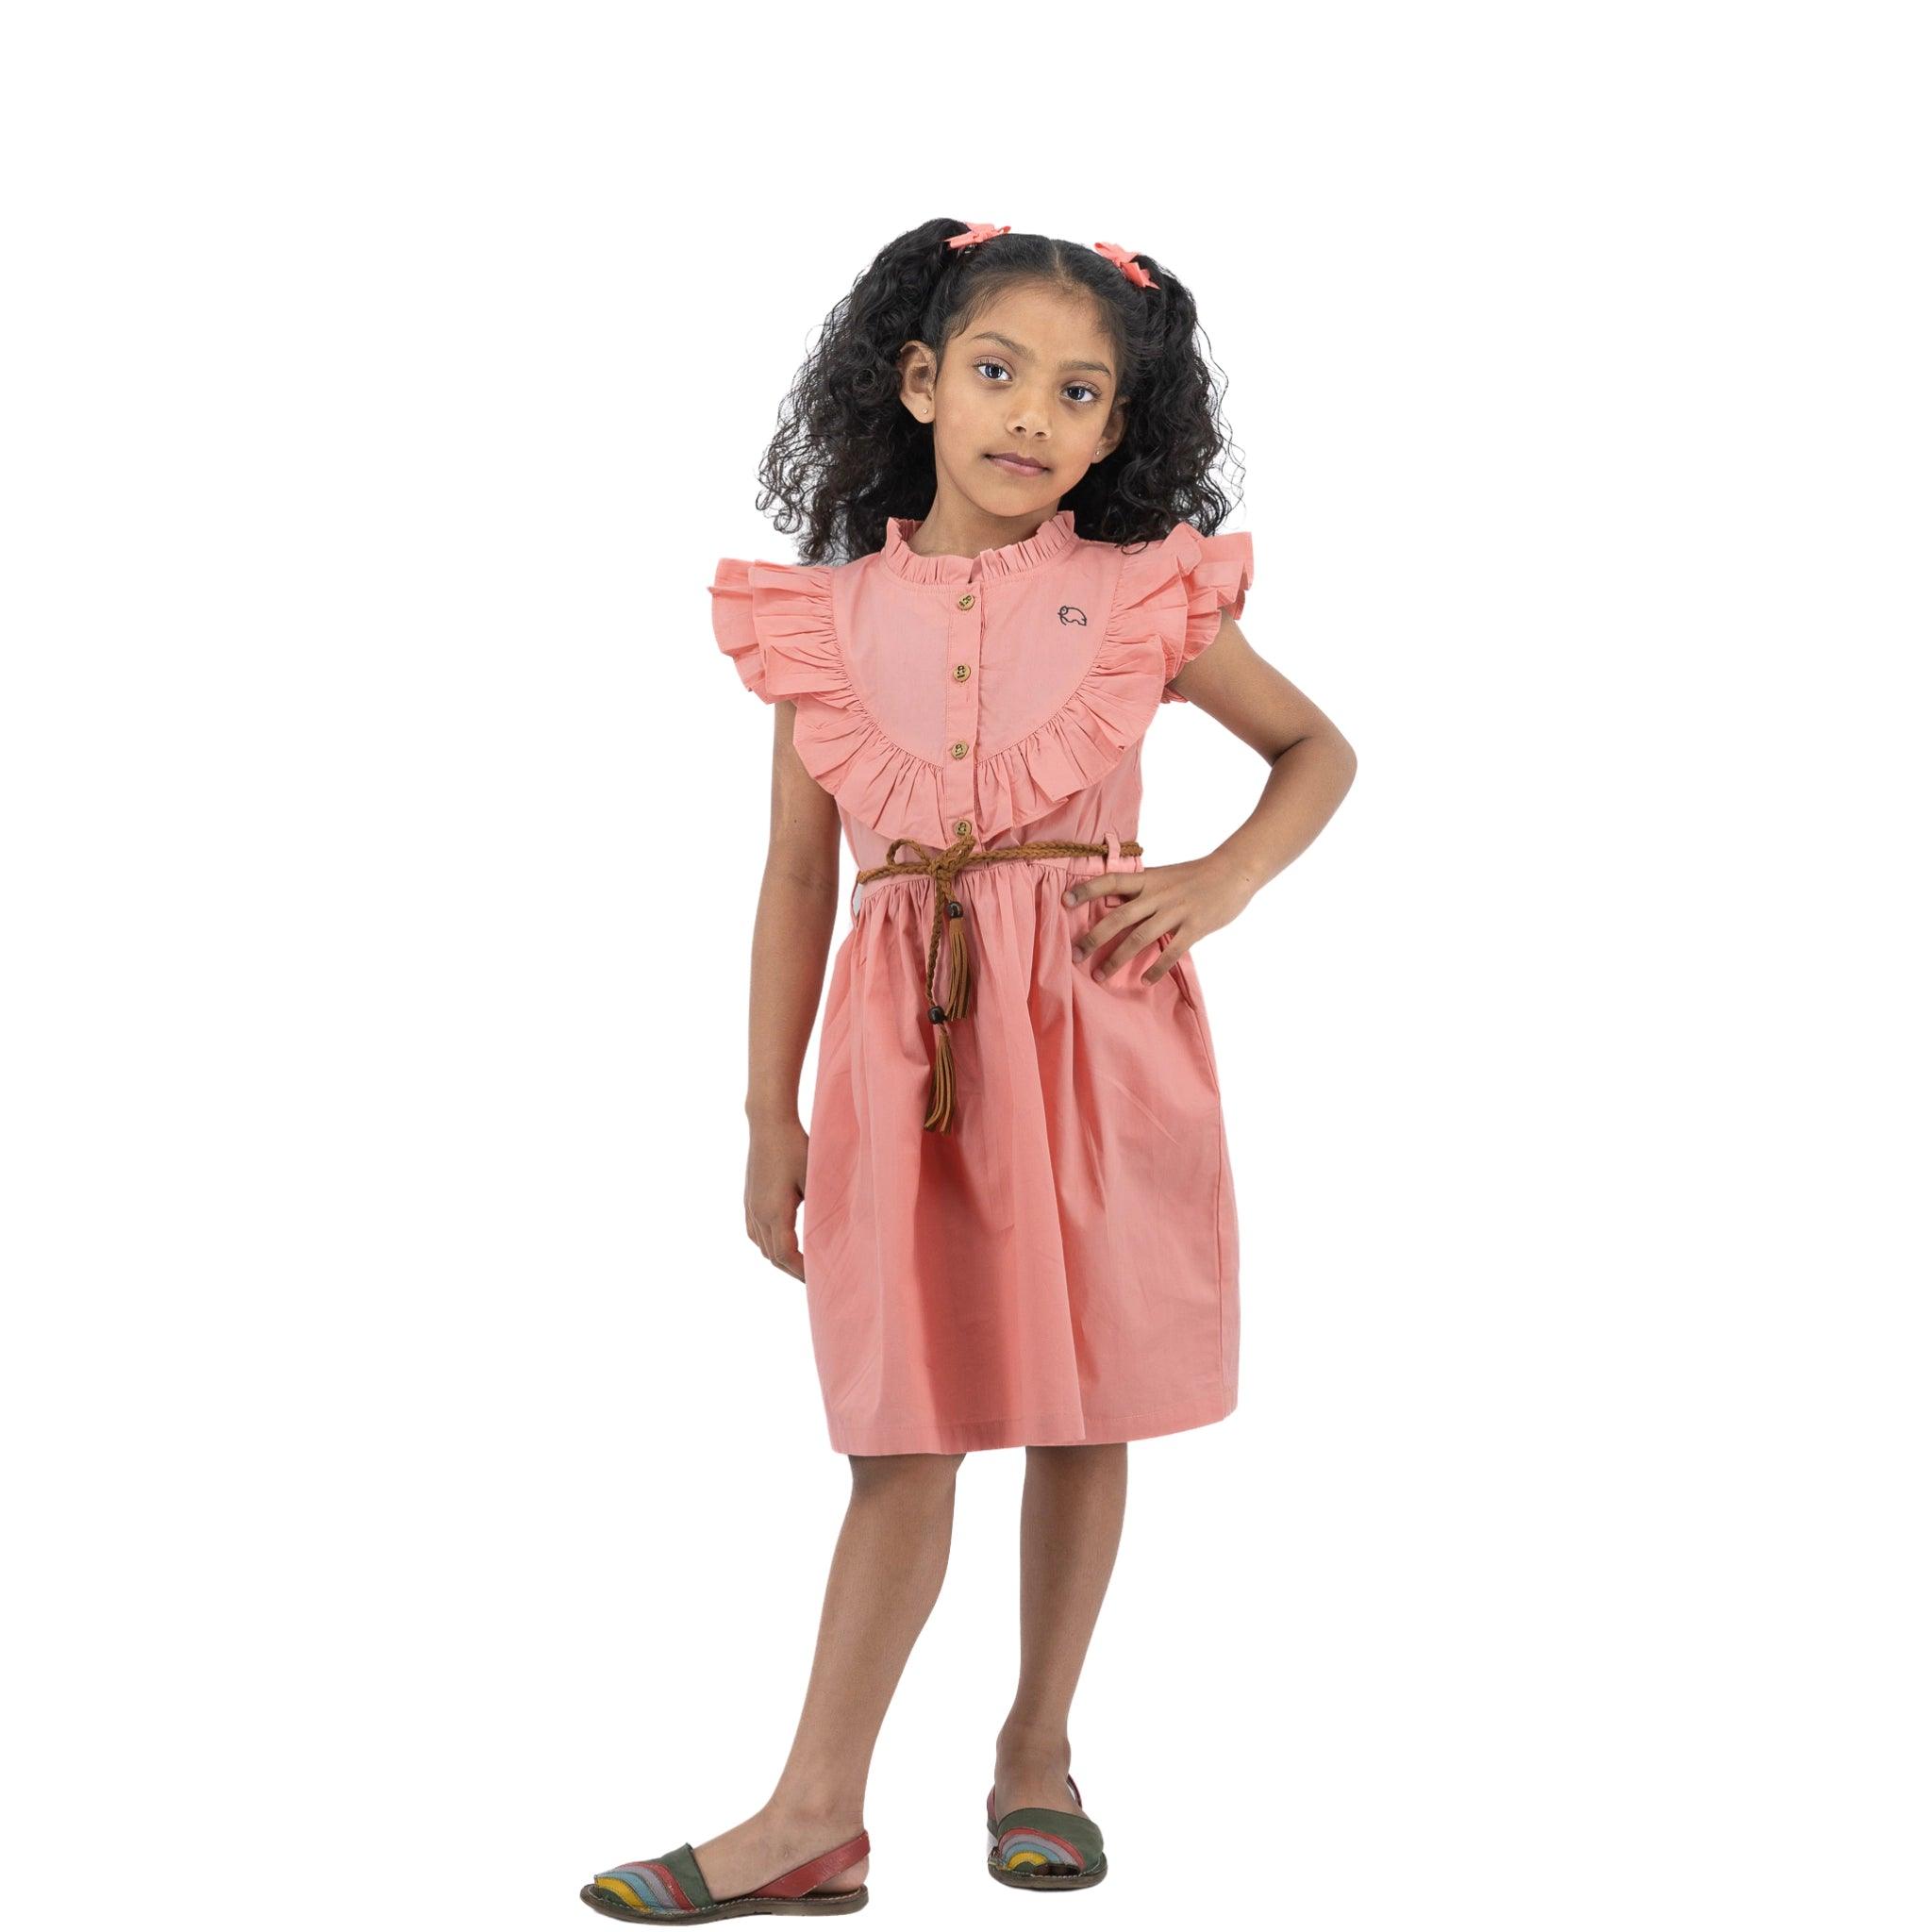 Young girl with curly hair, wearing a Karee peach and cream butterfly sleeve cotton dress and multicolored sandals, standing and looking thoughtfully at the camera on a white background.